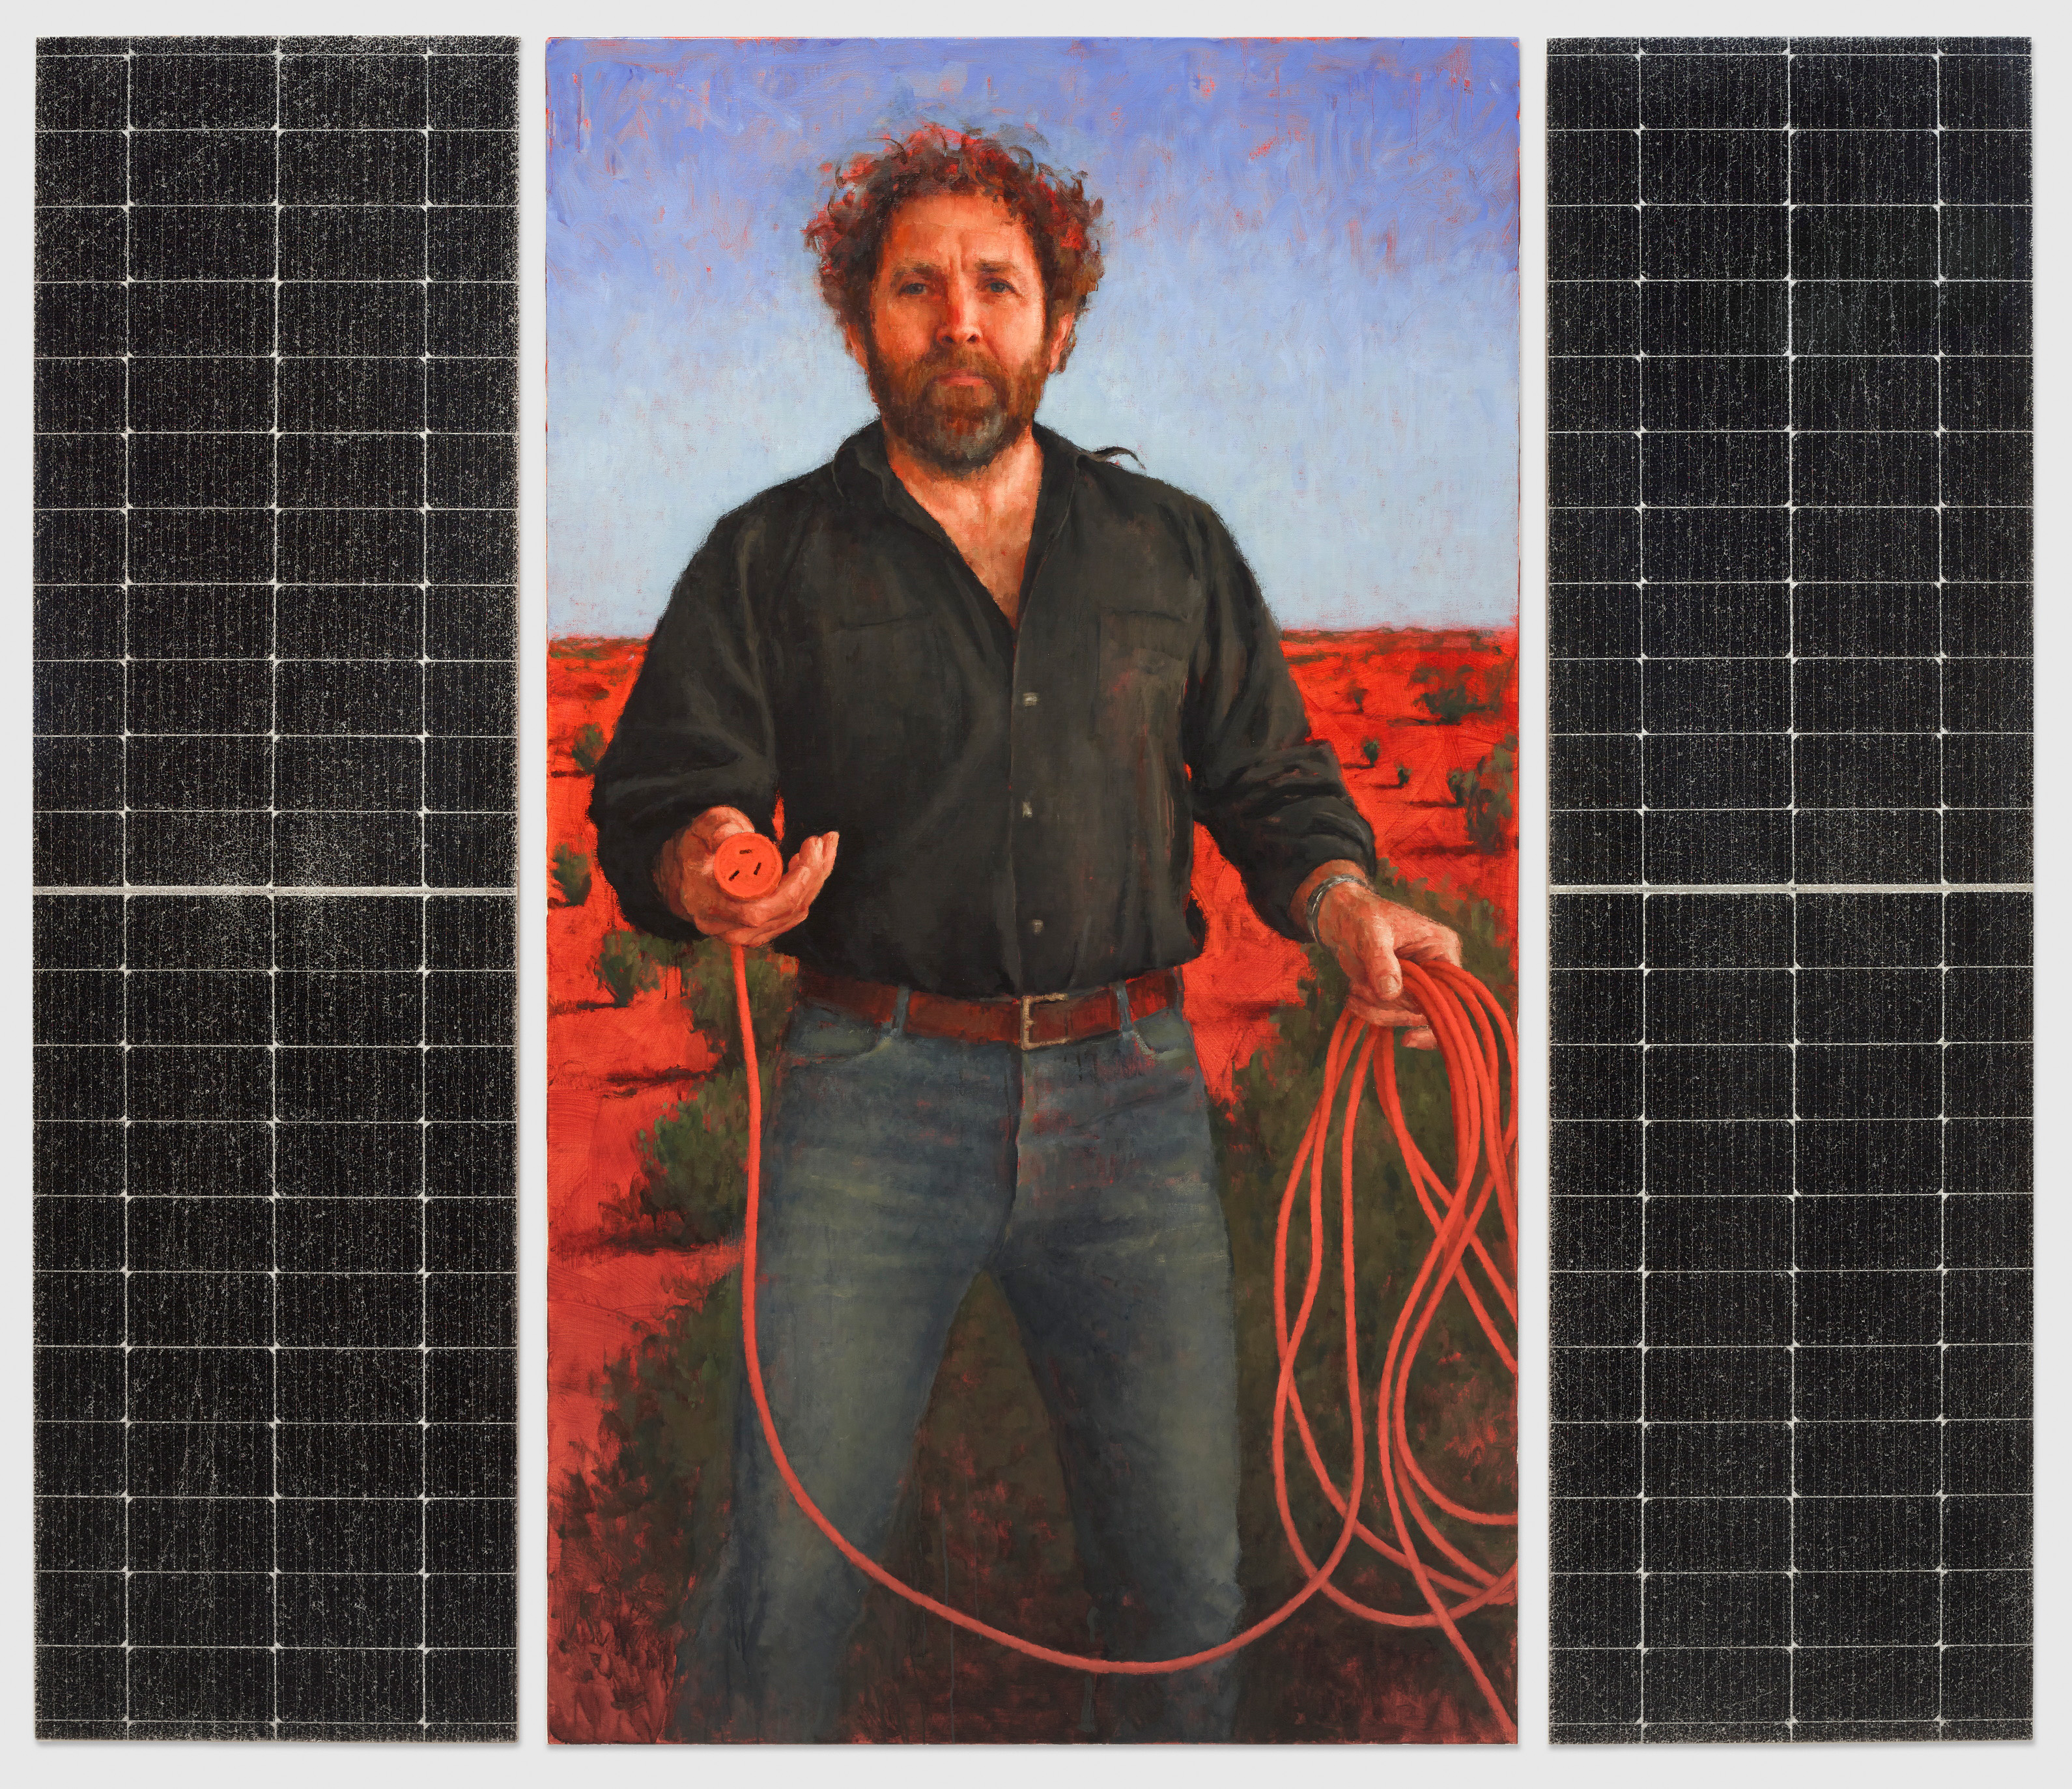 A portrait of a bearded middle-aged man in the outback, holding a red electrical cord